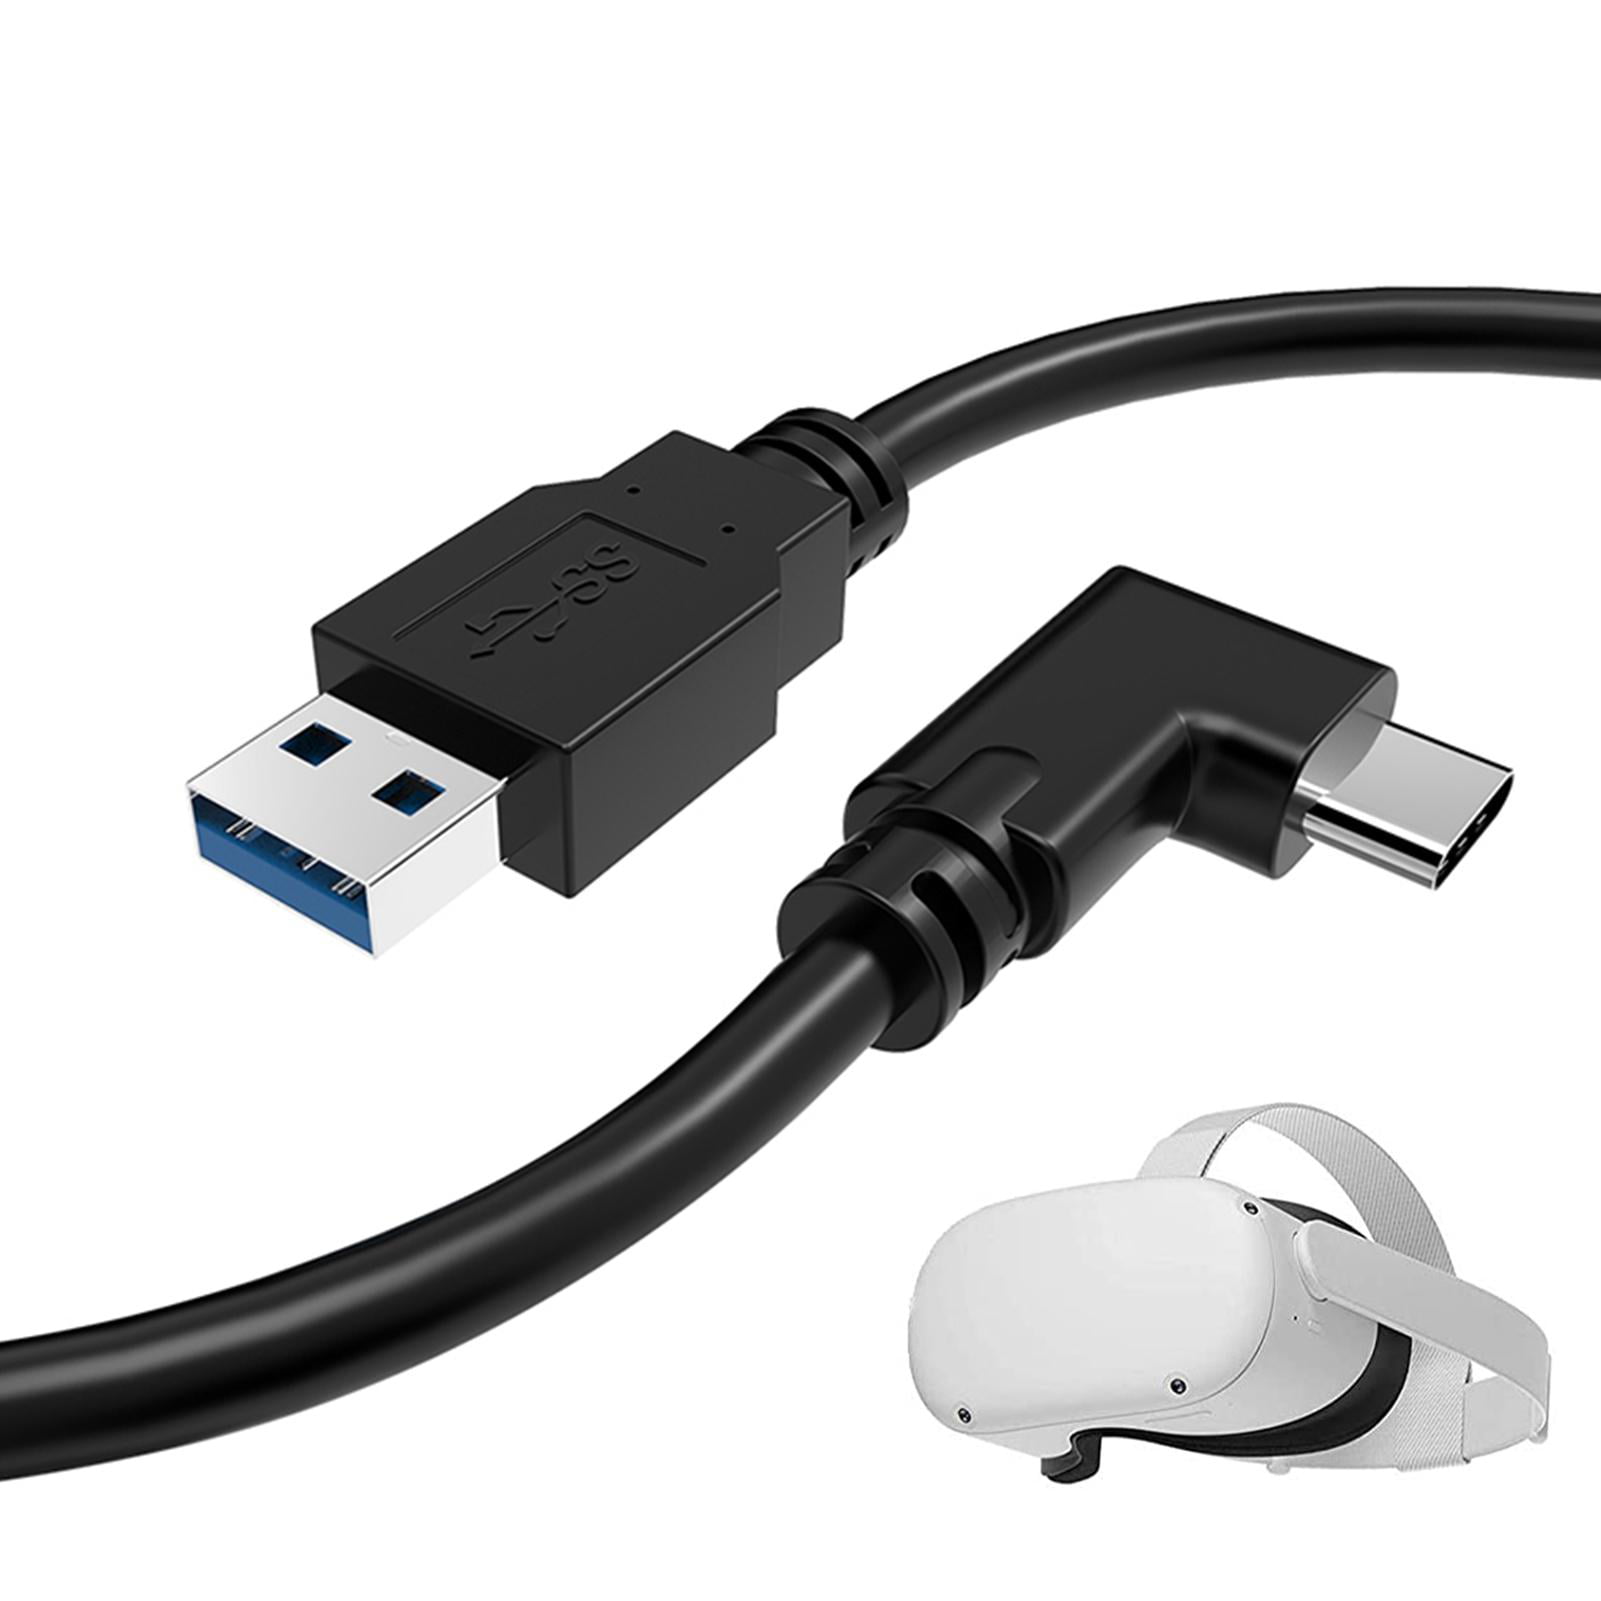 USB 3.2 Gen 1 Type A to C Cable 5m Oculus Link Cable 16ft High Speed Data Transfer & Fast Charging Compatible with Oculus Quest / Quest 2 VR Headset and Gaming PC Recuown Oculus Quest 2 Link Cable 